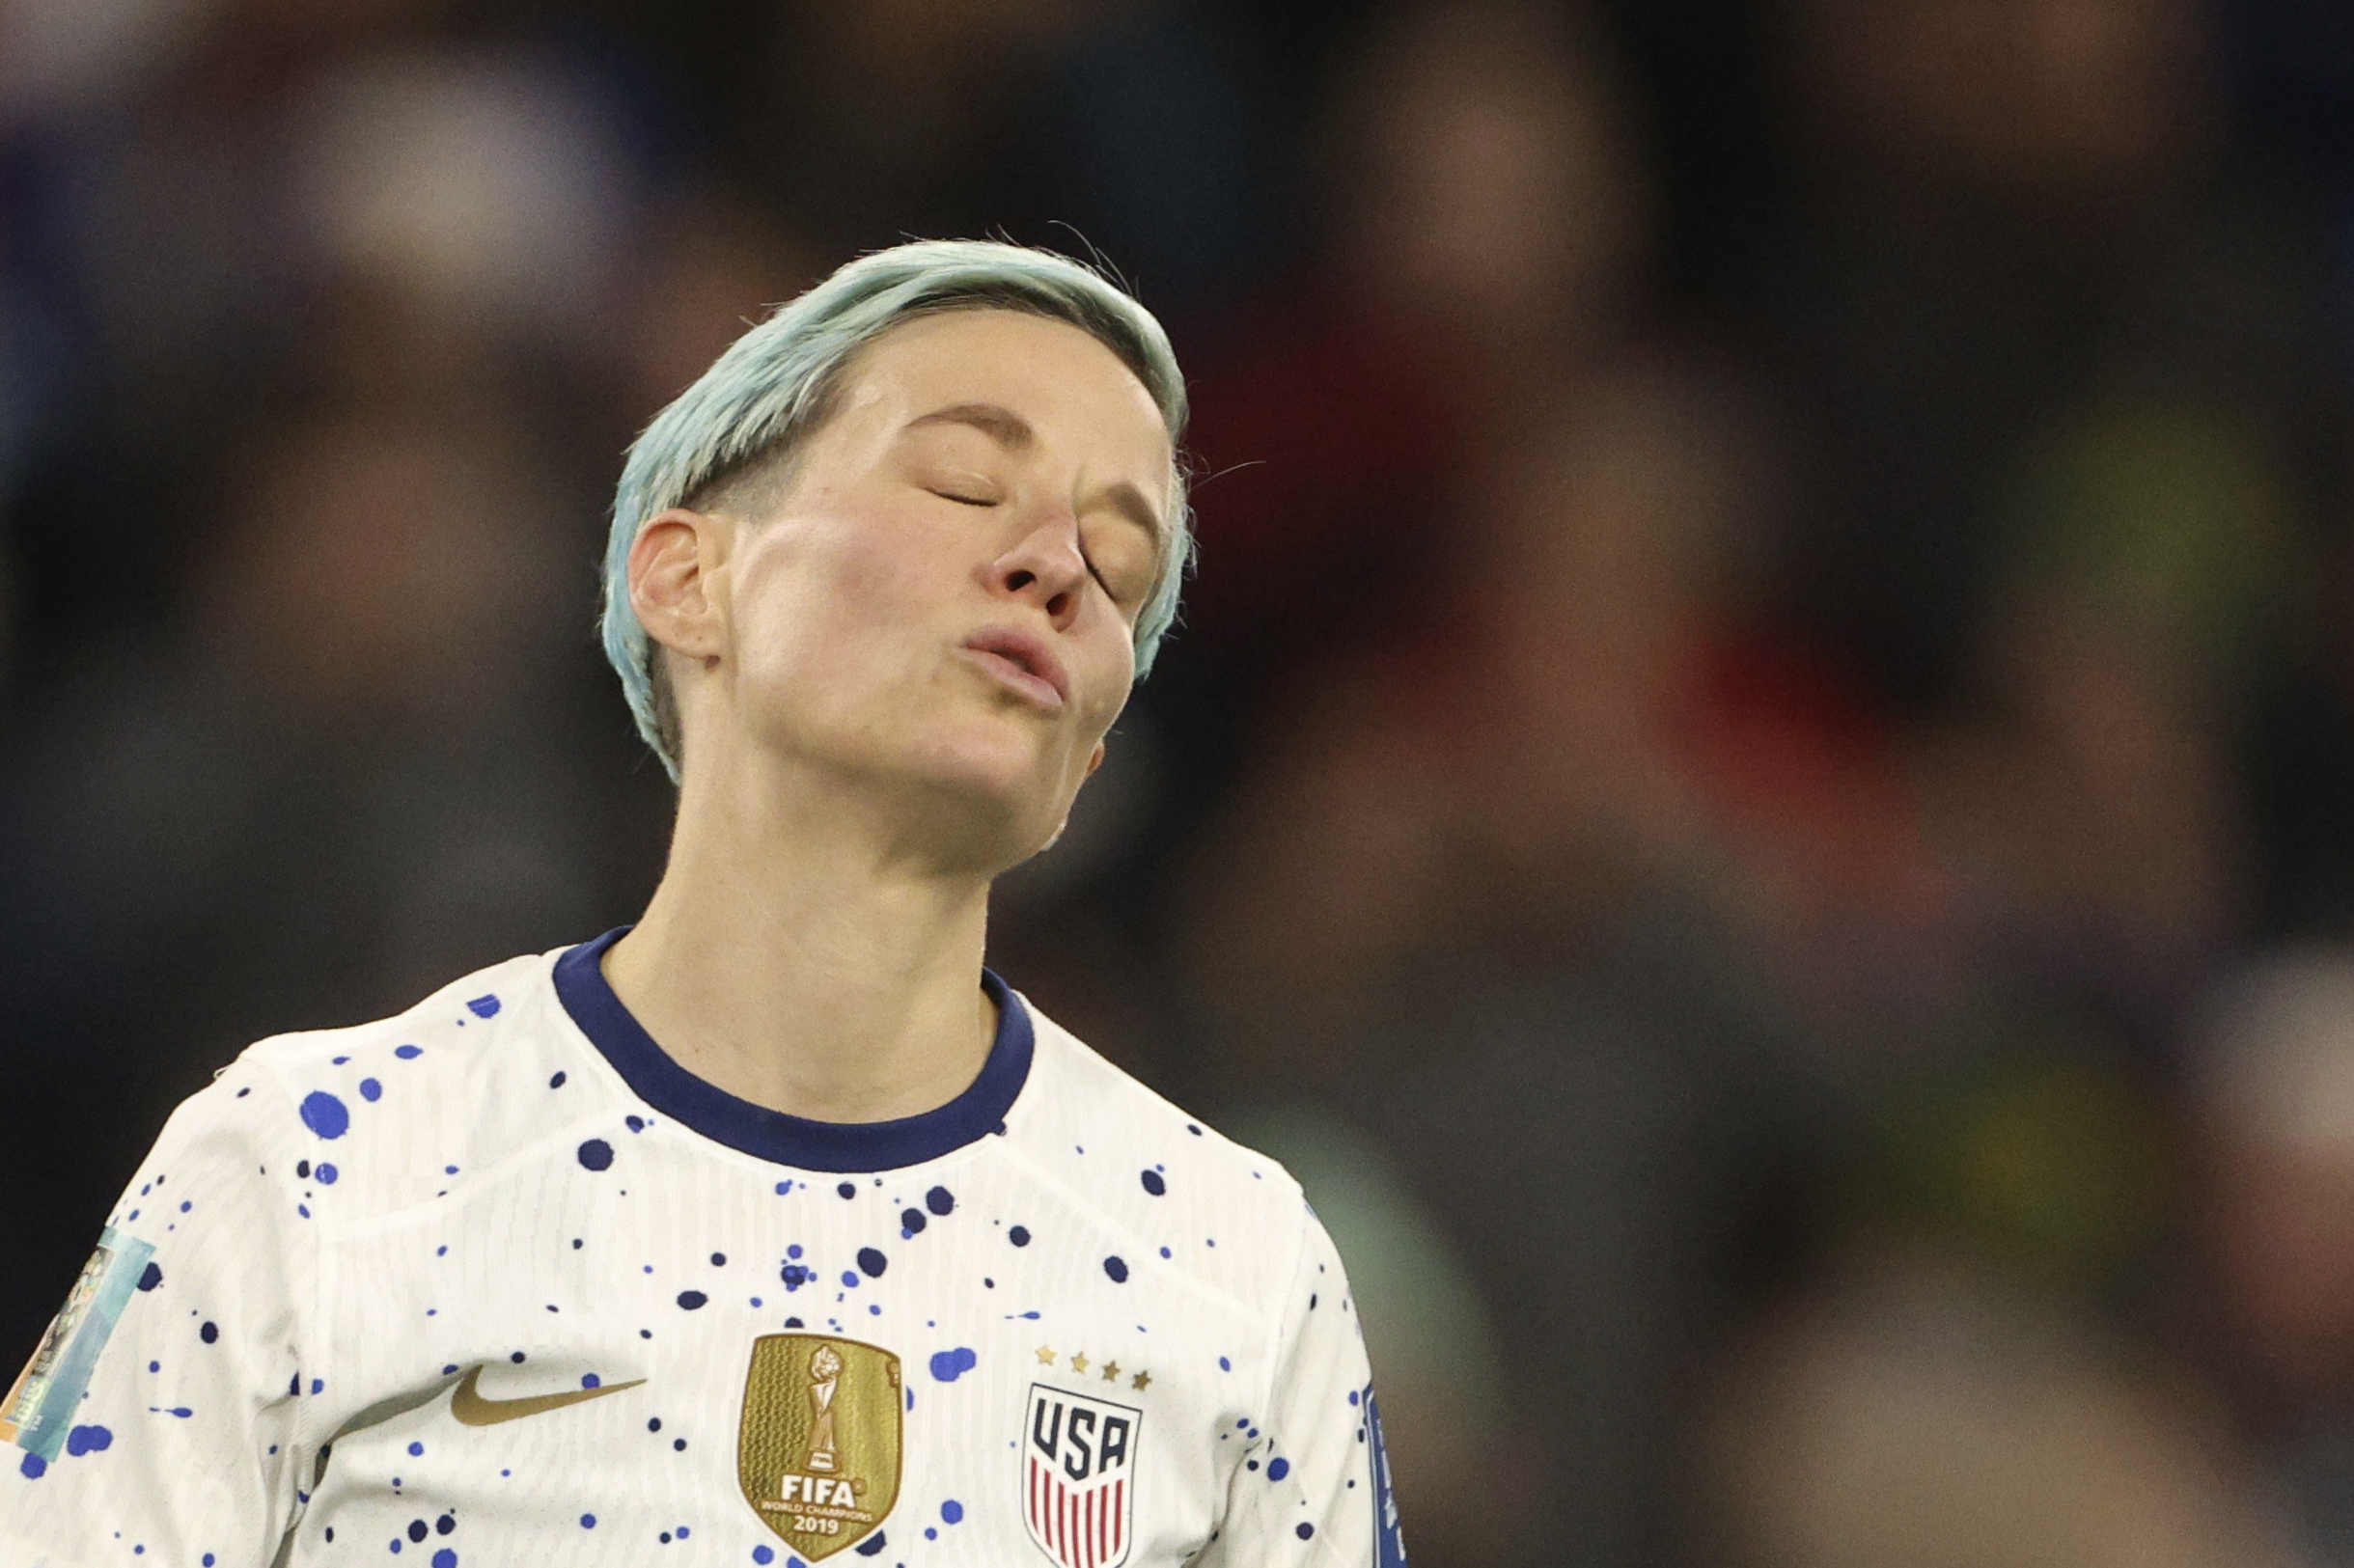 ‘Glad They Lost’: Conservatives Delight in U.S. Women’s Ouster from World Cup and Megan Rapinoe’s Crucial Missed Penalty Kick